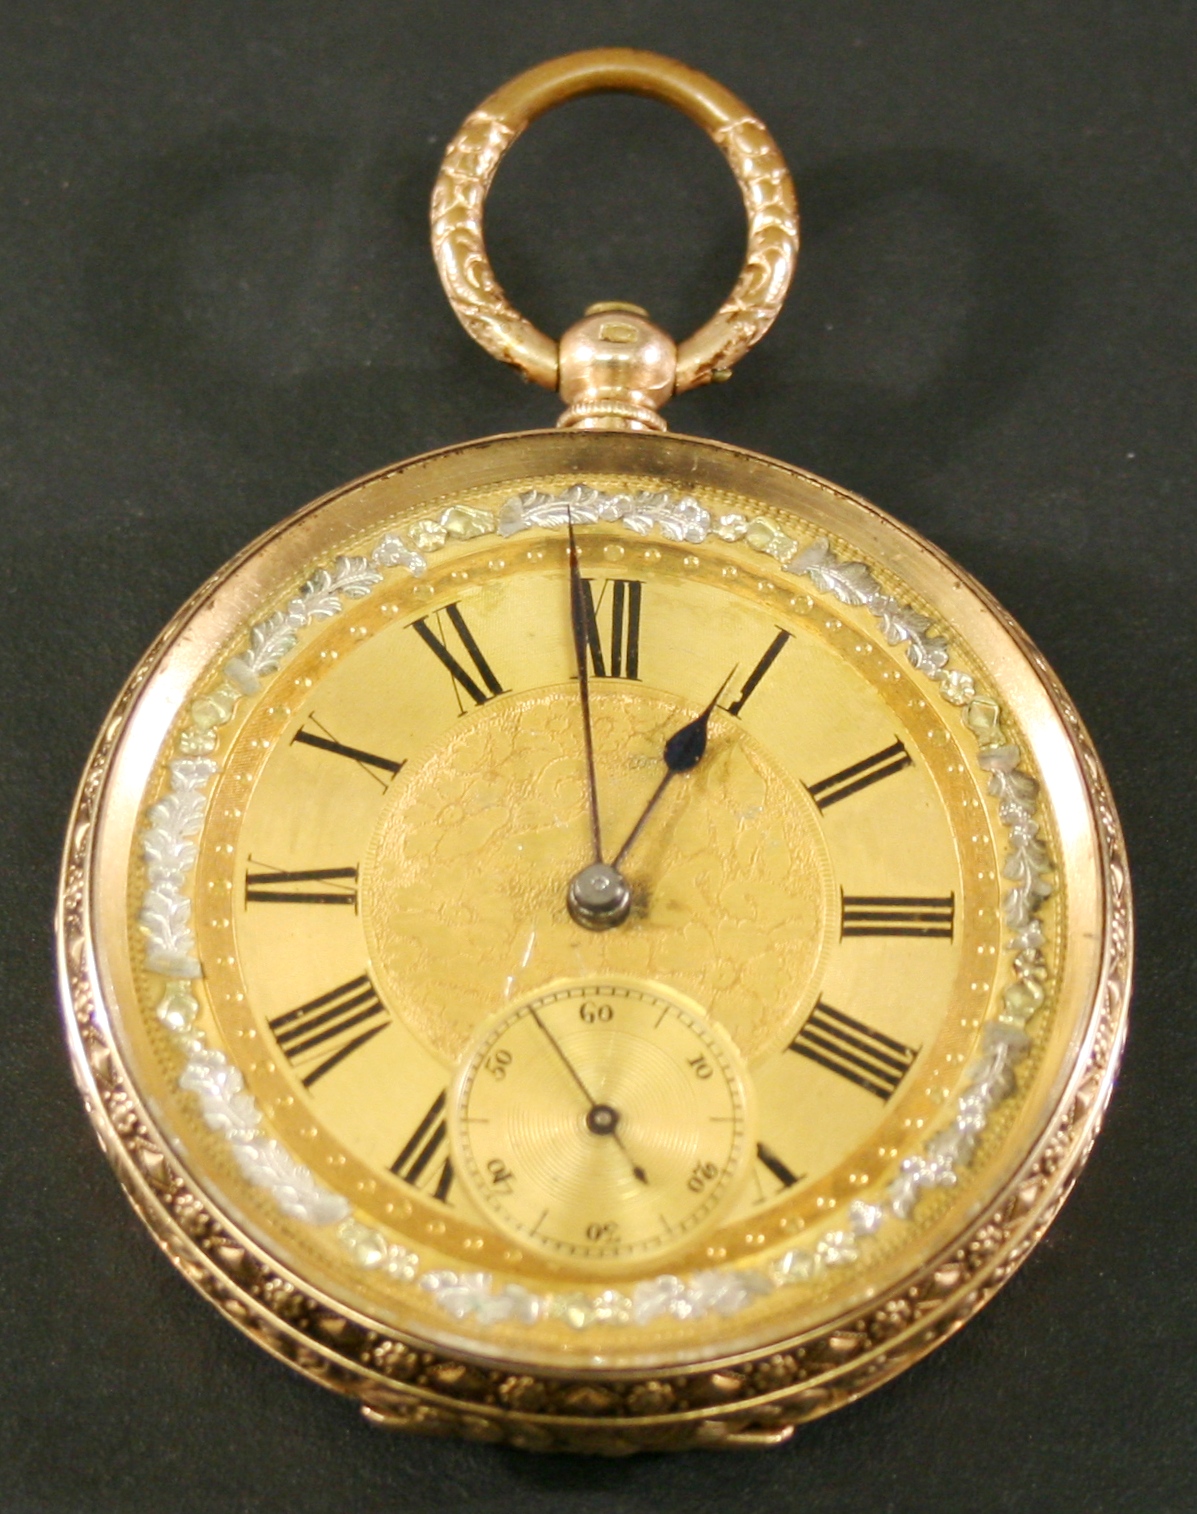 A SWISS 14K GOLD CASED OPEN-FACED POCKET WATCH, the gold tone dial with Roman hours framing a